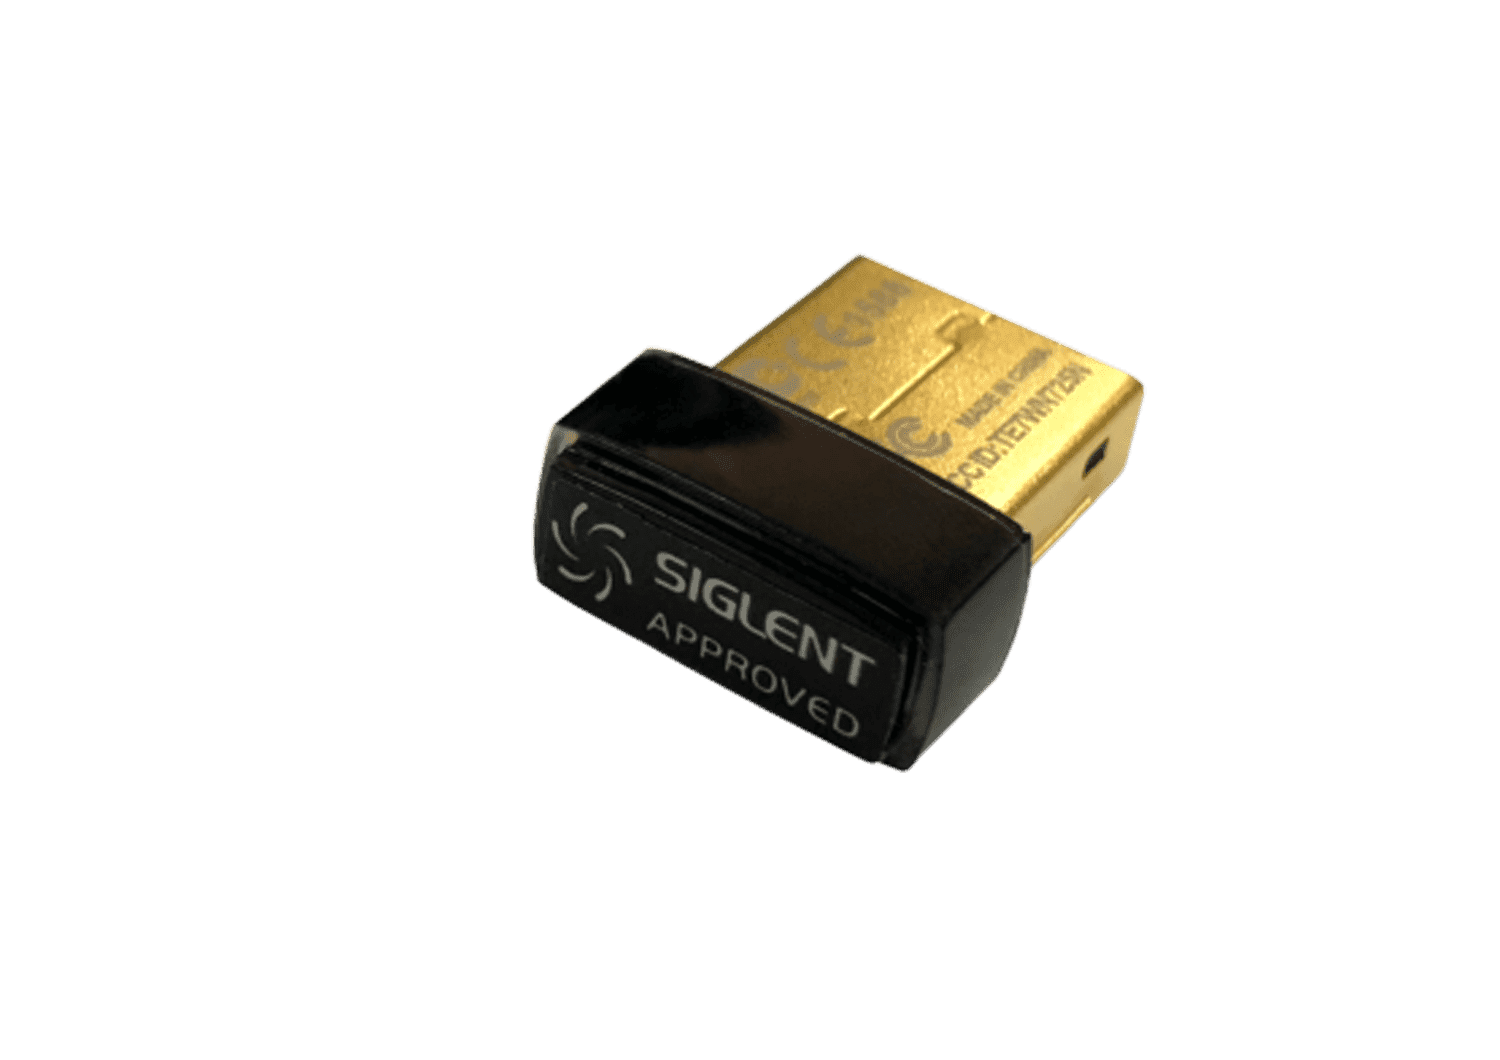 Siglent USB WiFi Adapter (Discontinued)